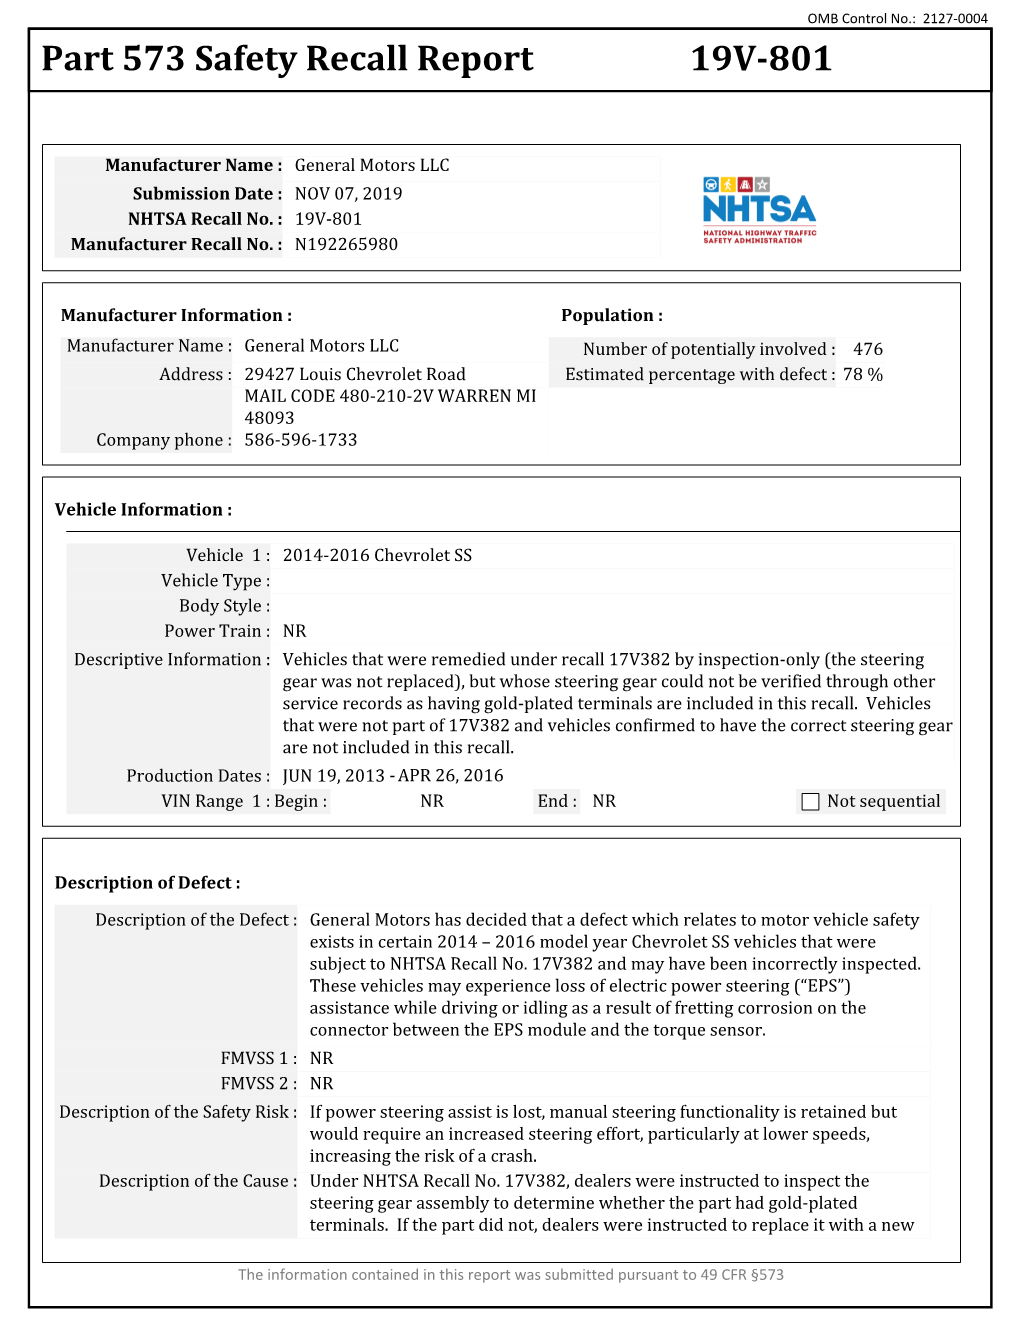 Part 573 Safety Recall Report 19V-801